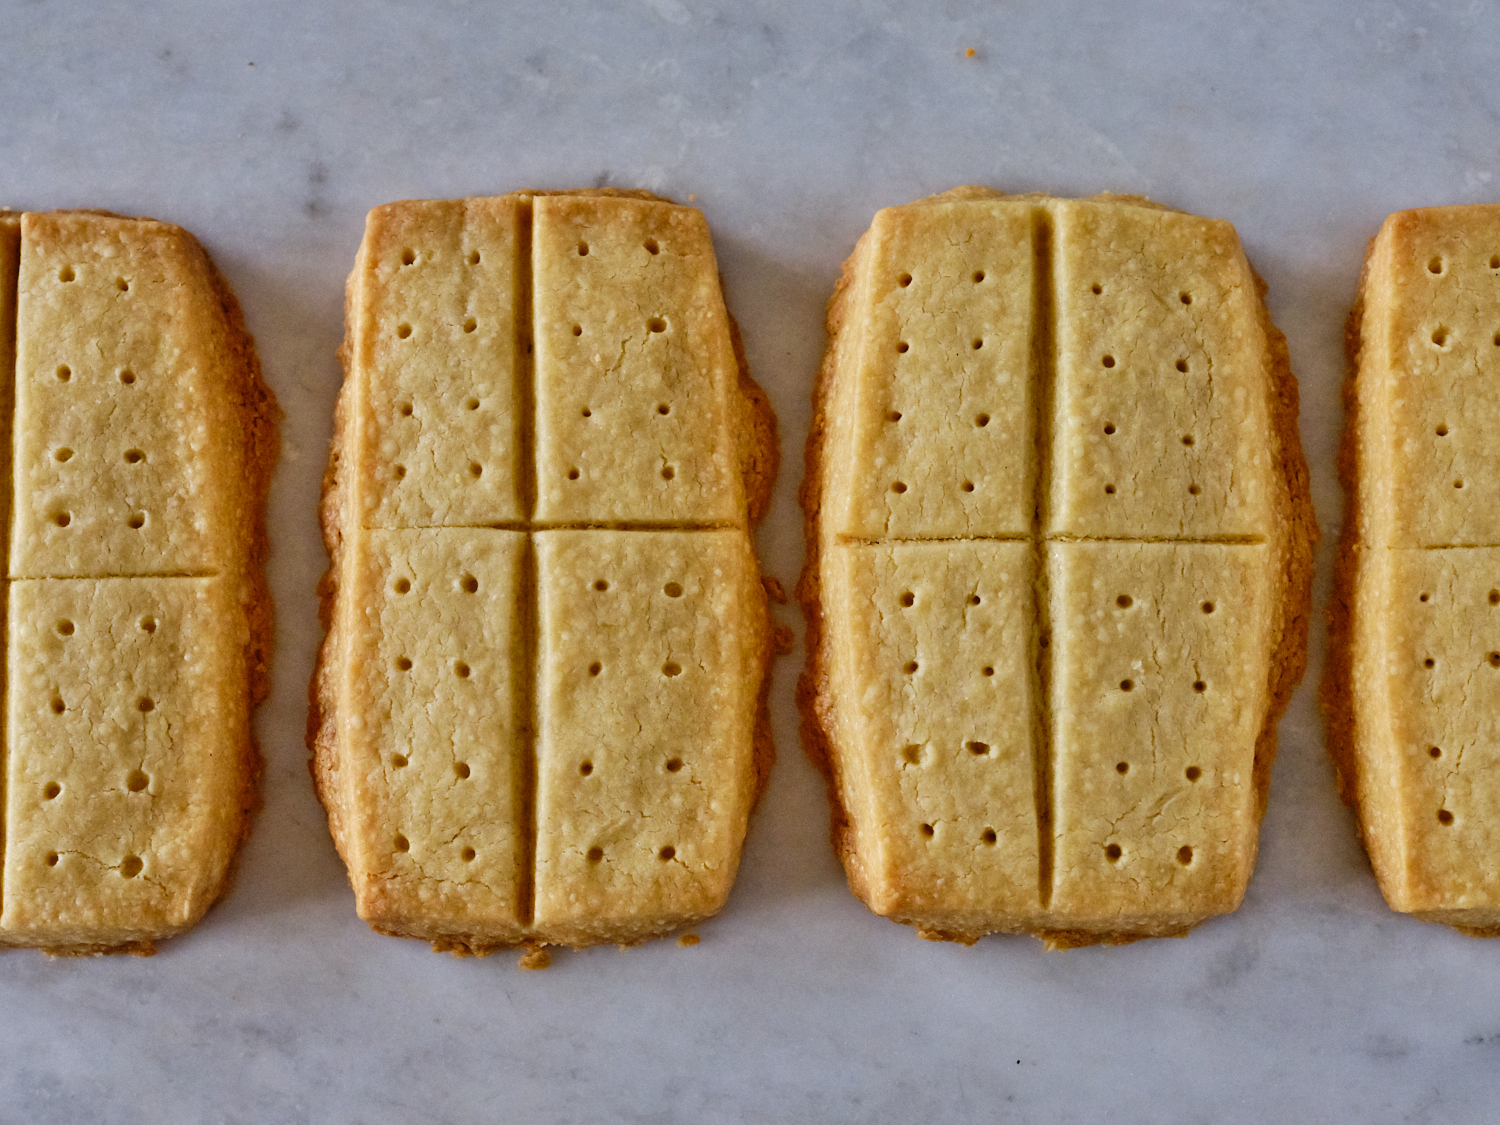 A close-up of four freshly baked shortbread biscuits